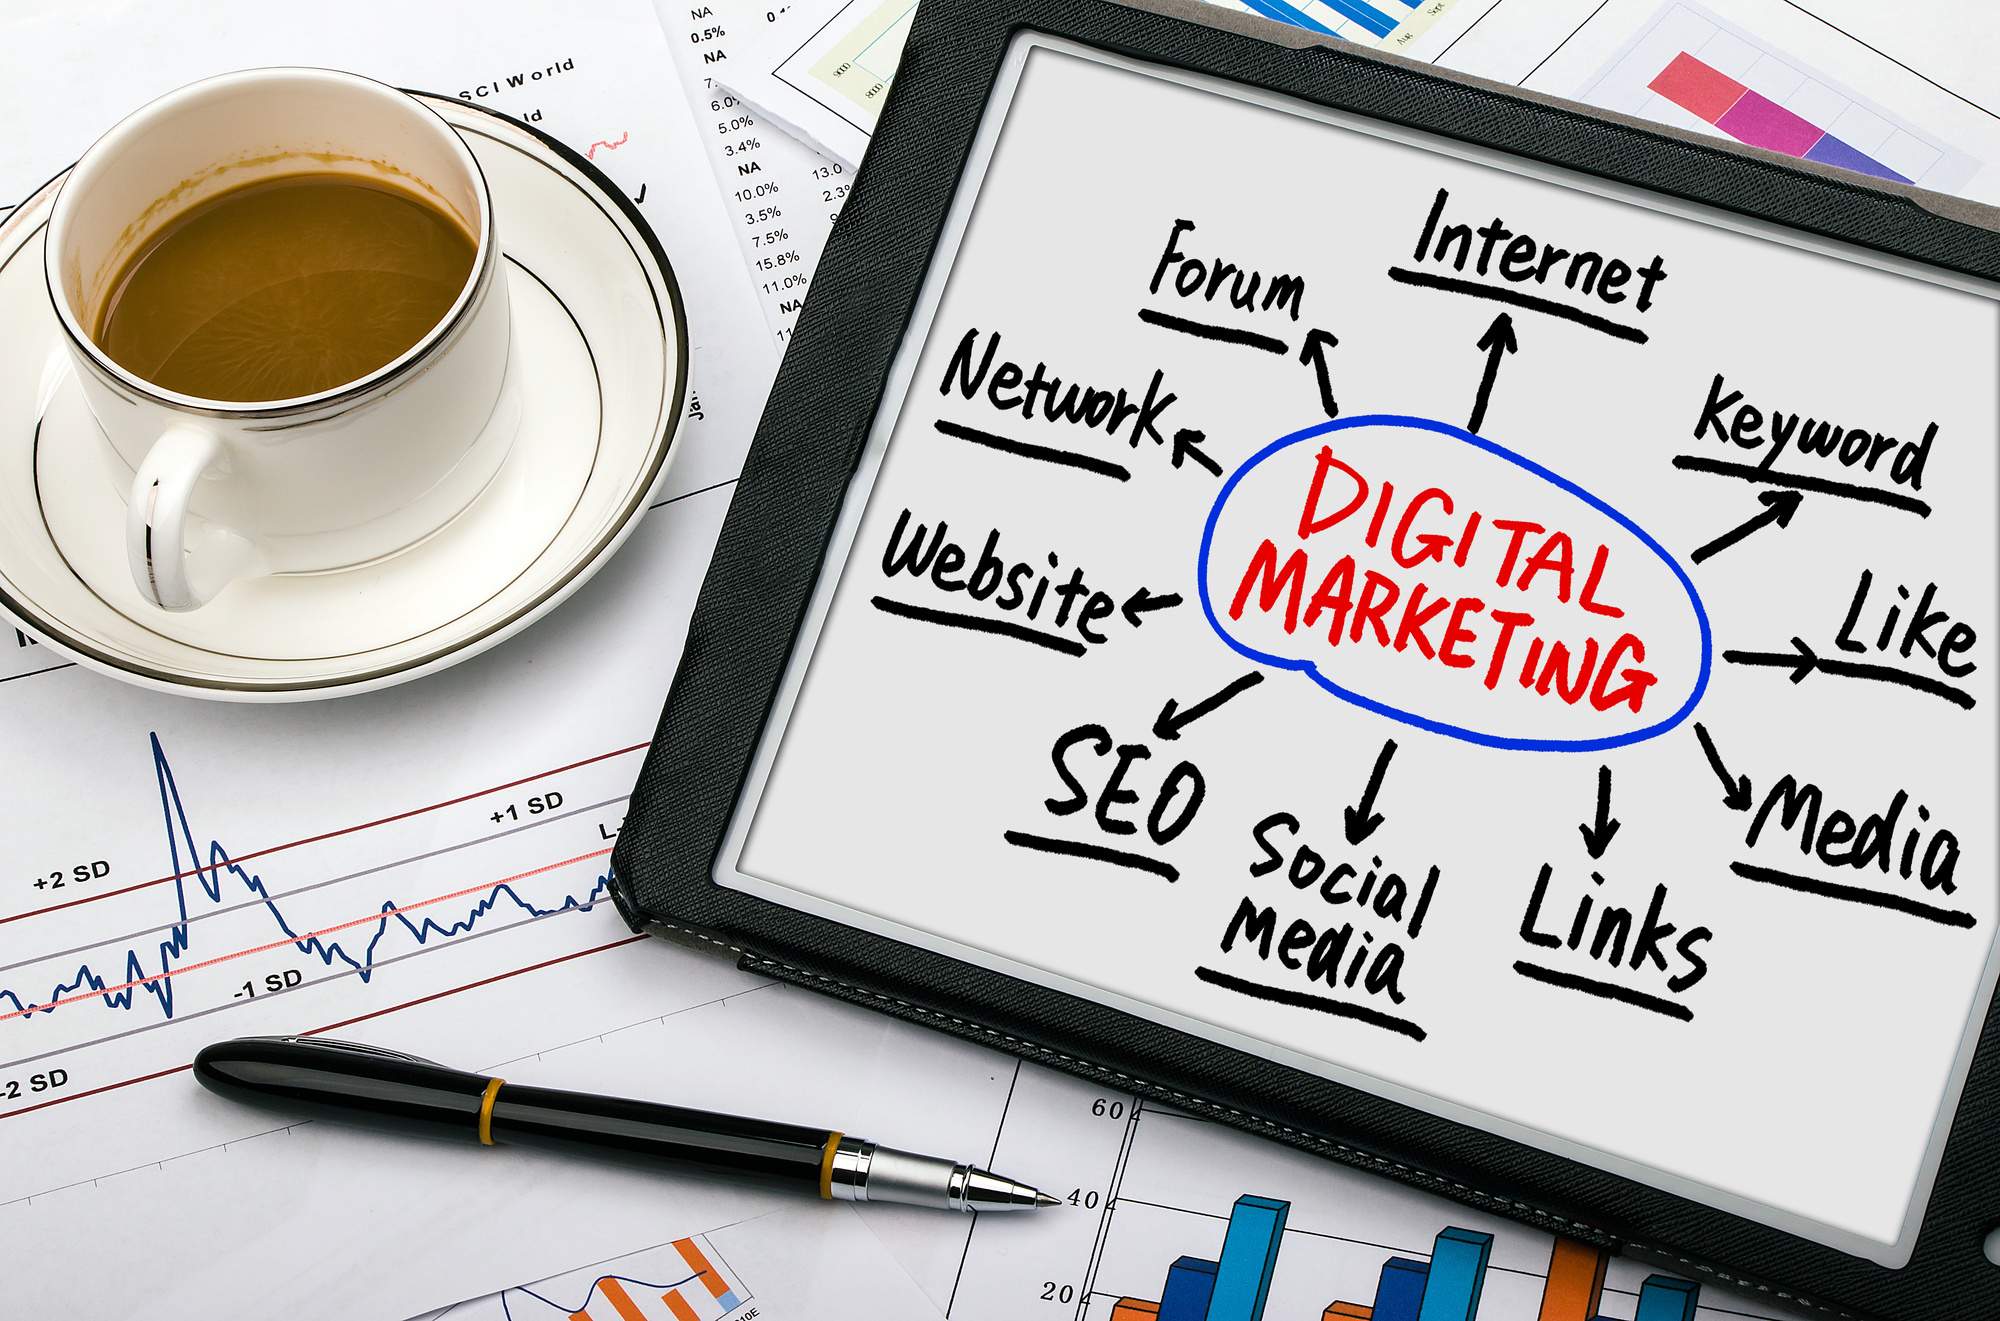 6 Digital Marketing Tips for an SEO Strategy That Gets Results